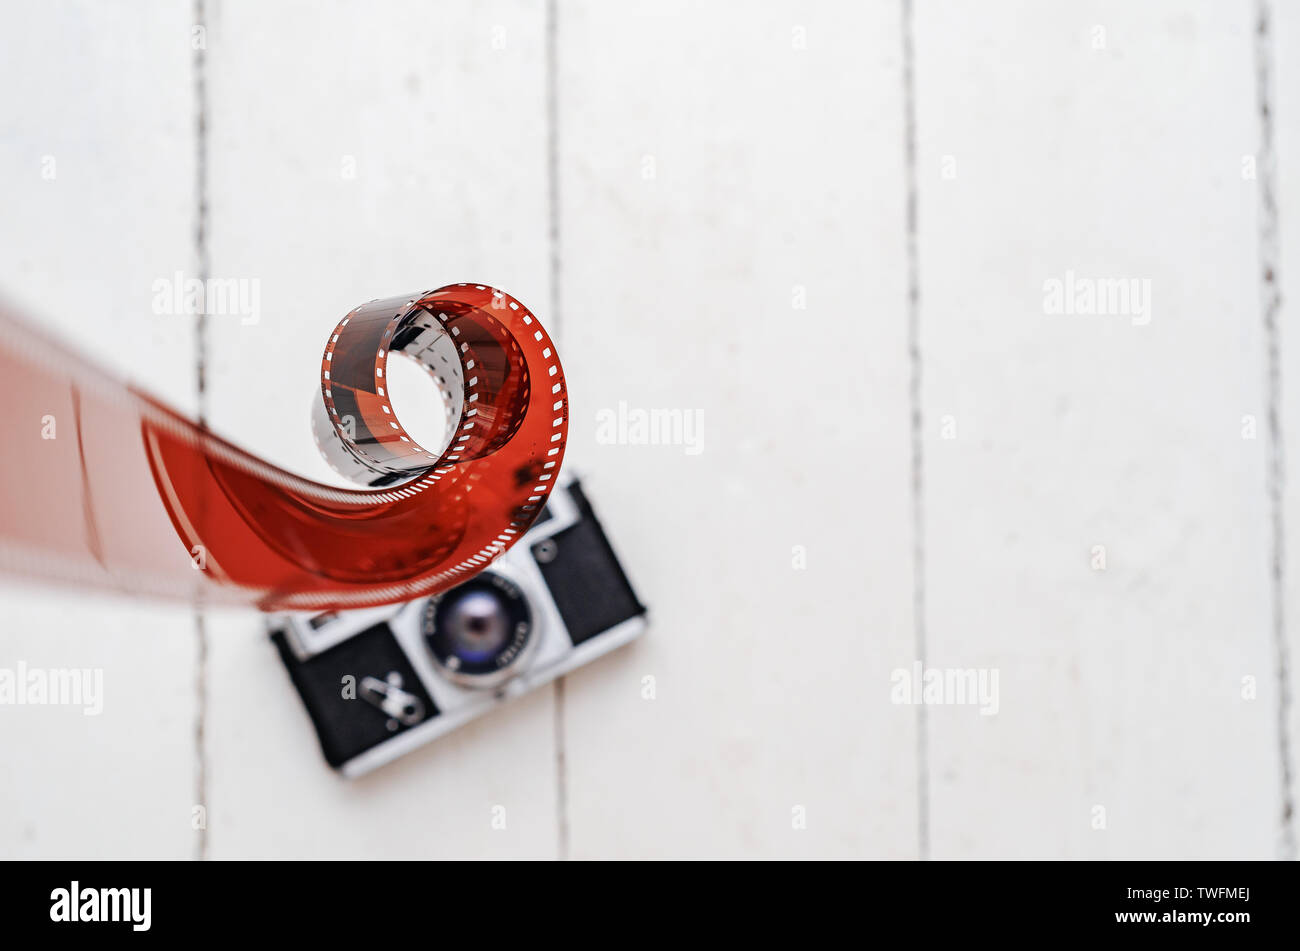 Vintage old camera with 35mm red film. Old equipment. Stock Photo